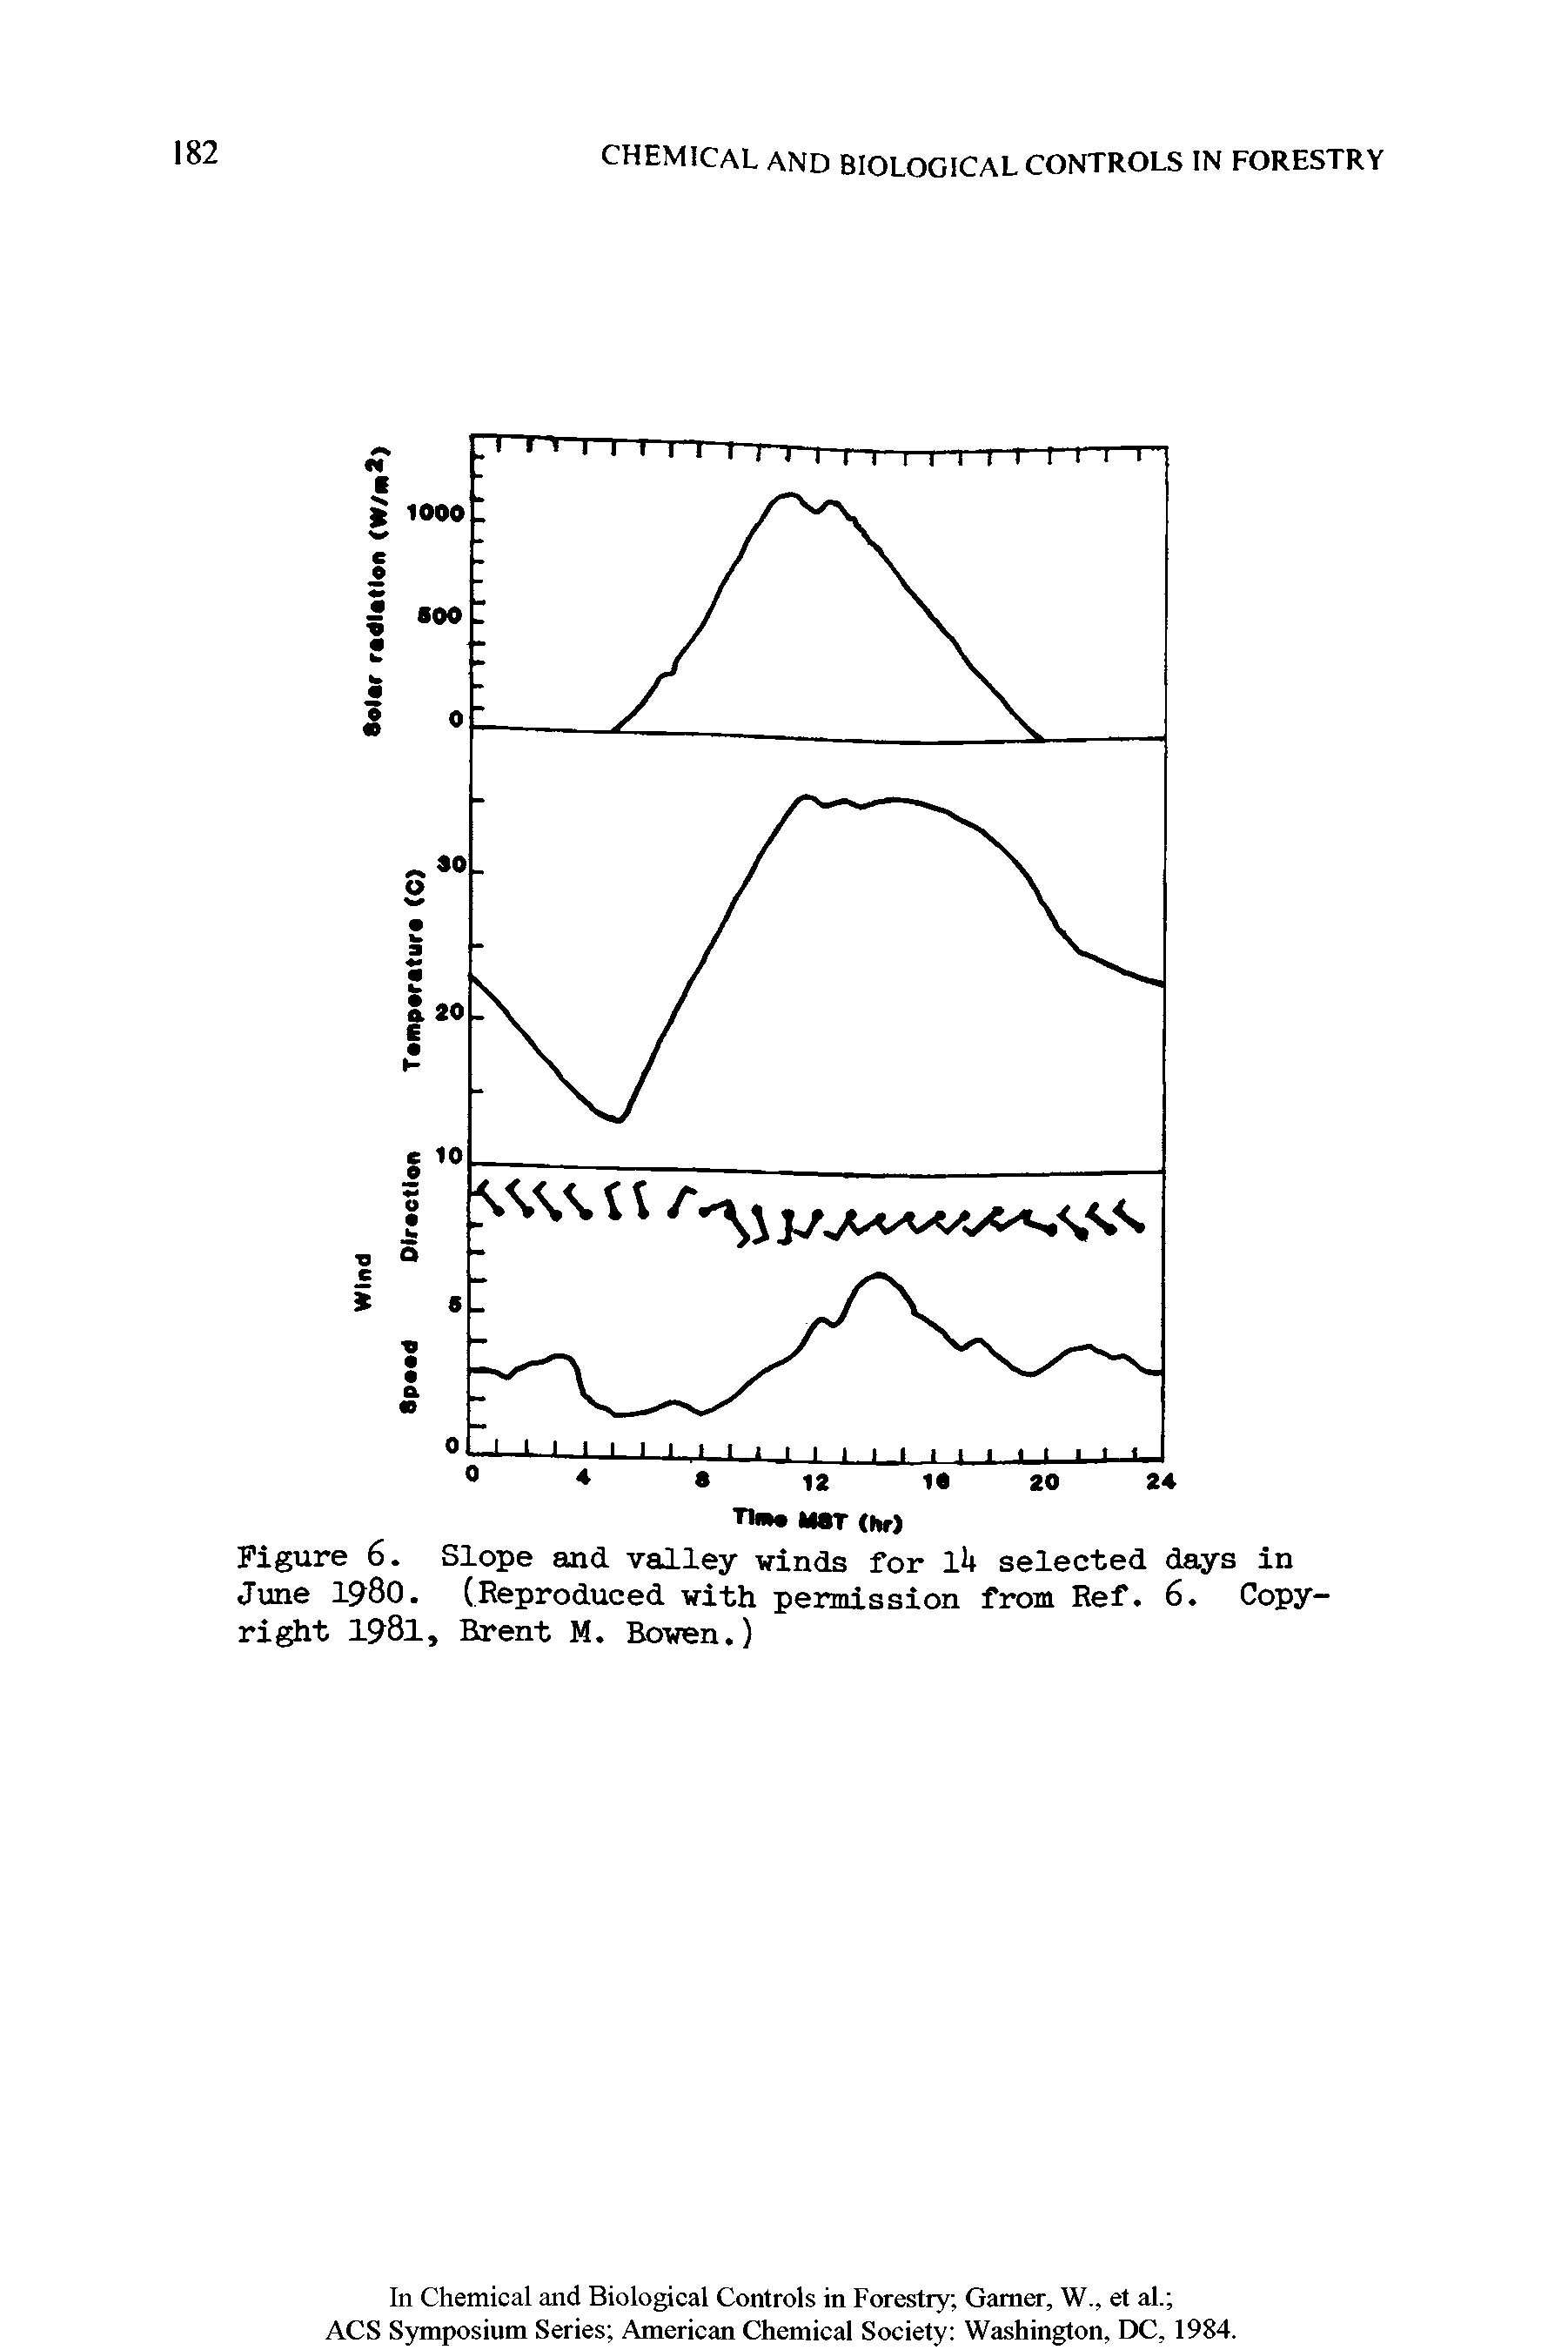 Figure 6. Slope and valley winds for lU selected days in June 1980. (Reproduced with permission from Ref. 6. Copyright 1981, Brent M. Bowen.)...